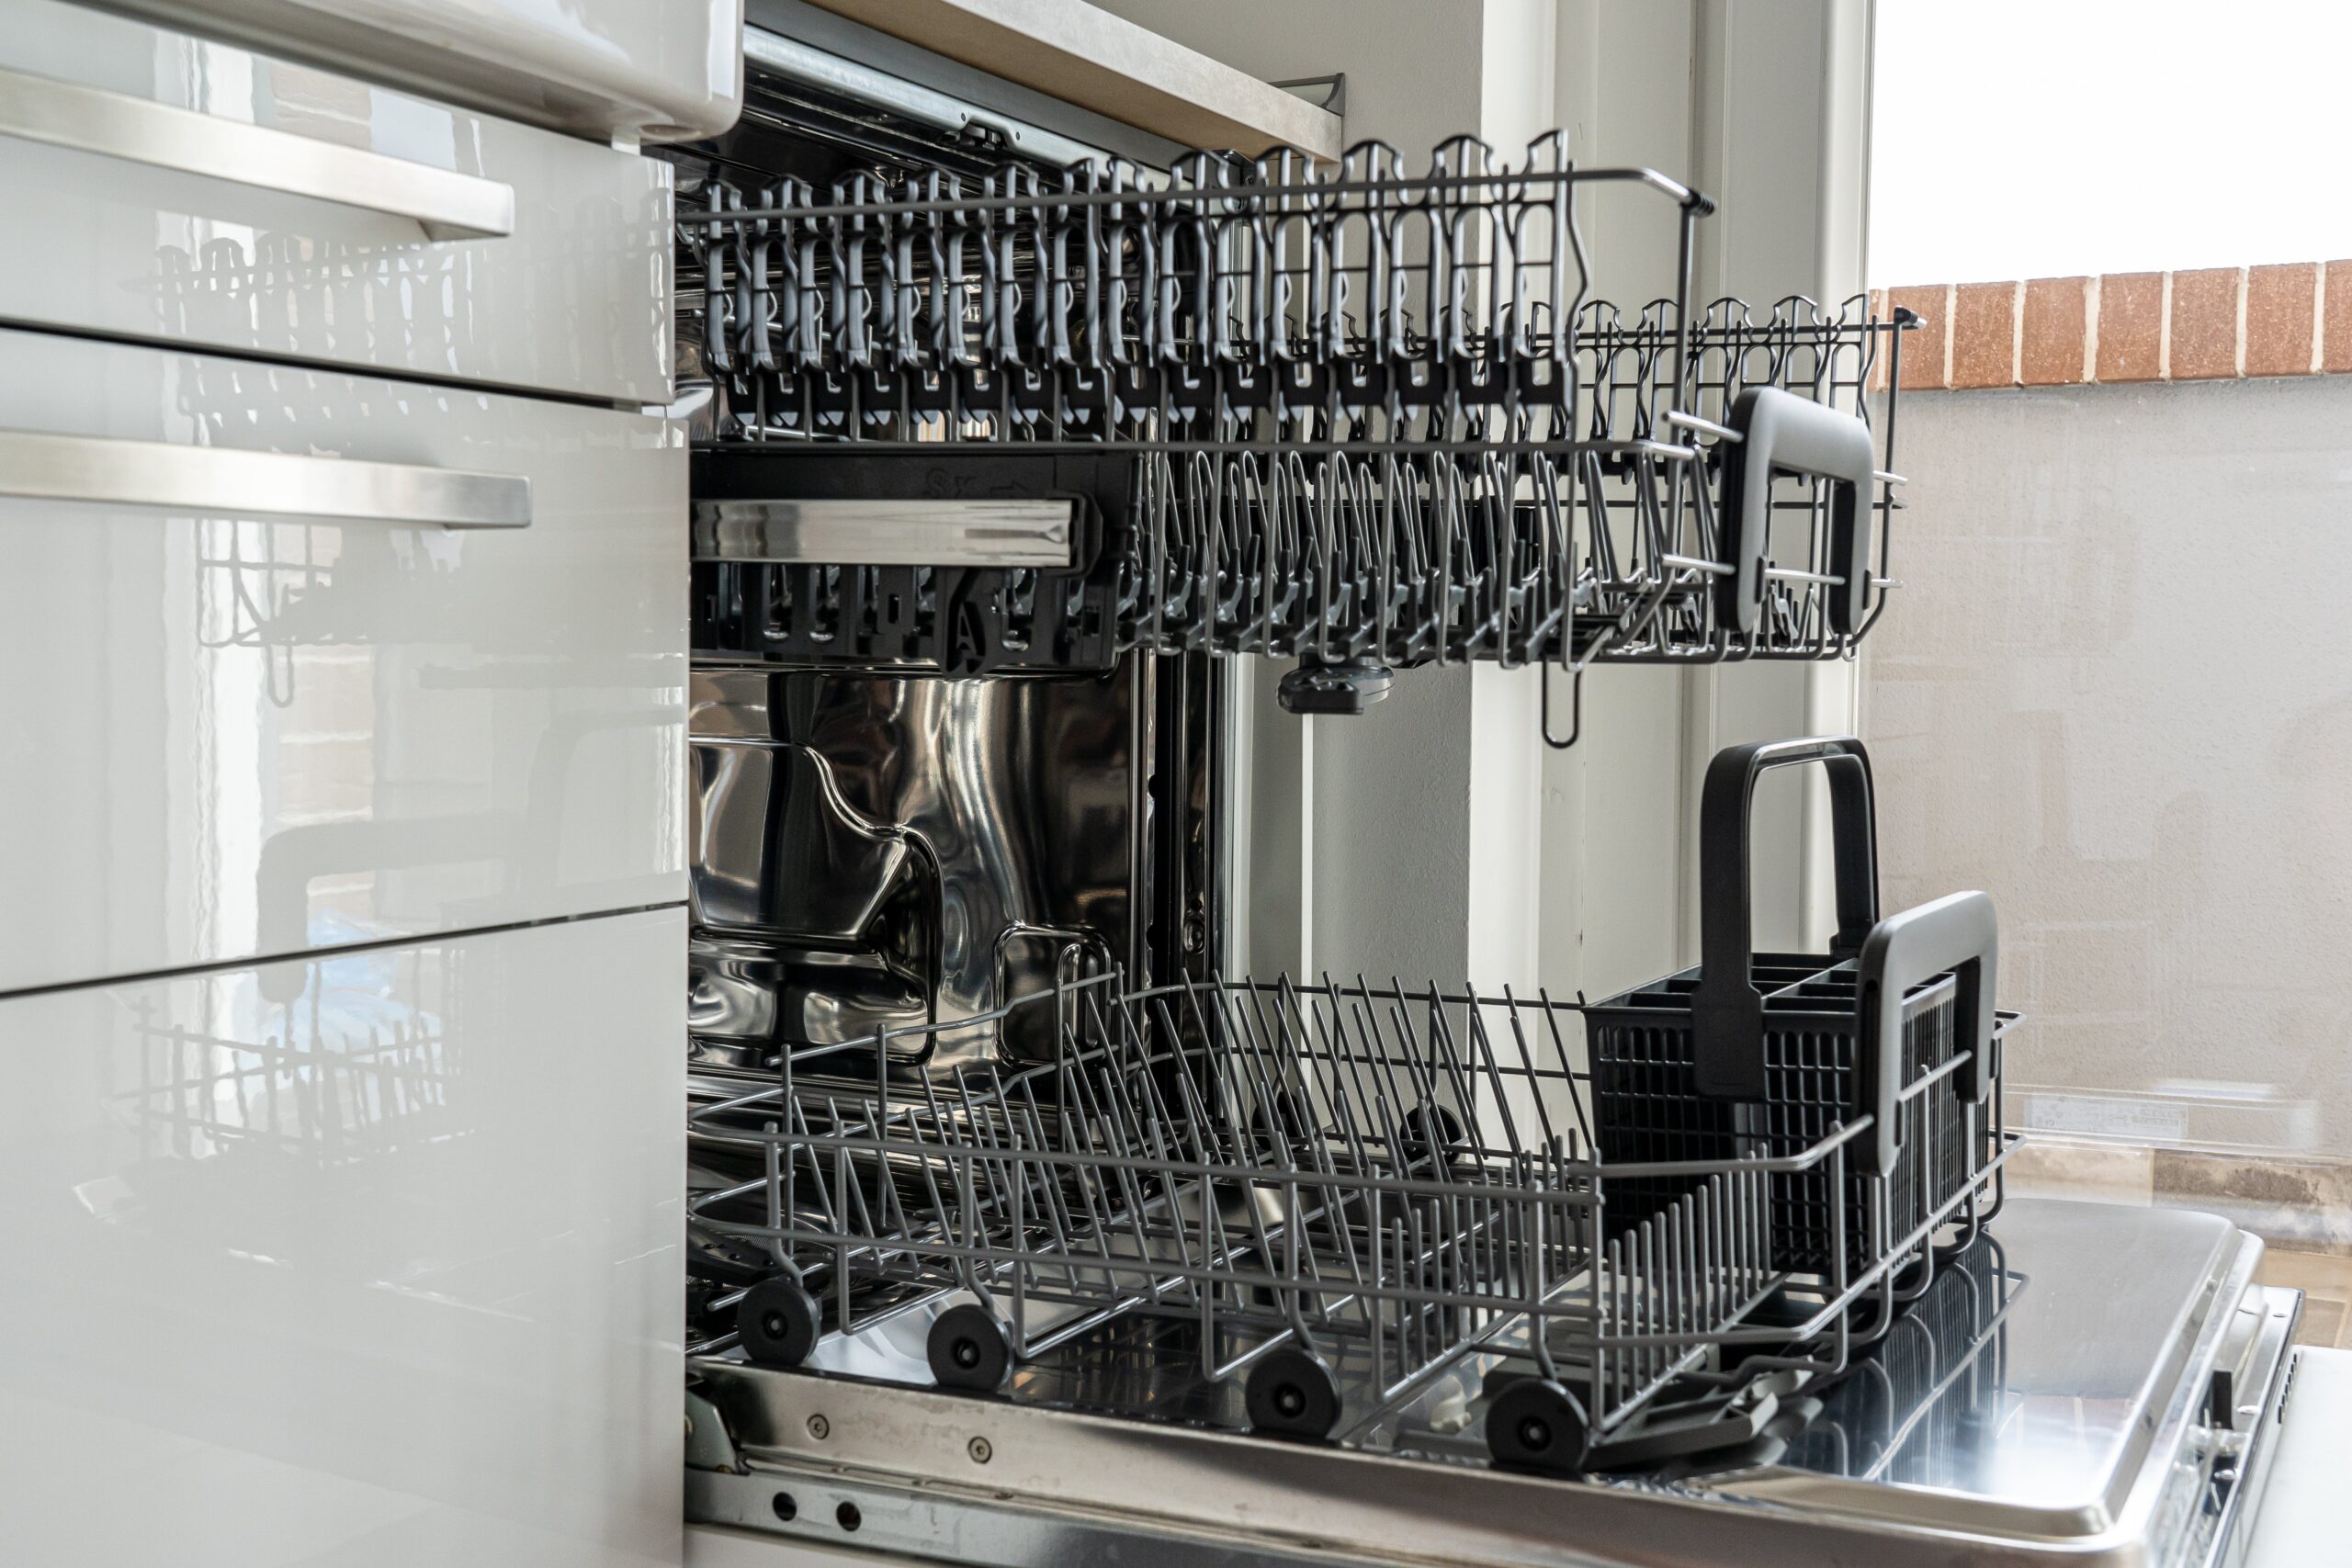 1b How to Make Your Dishwasher Last Longer